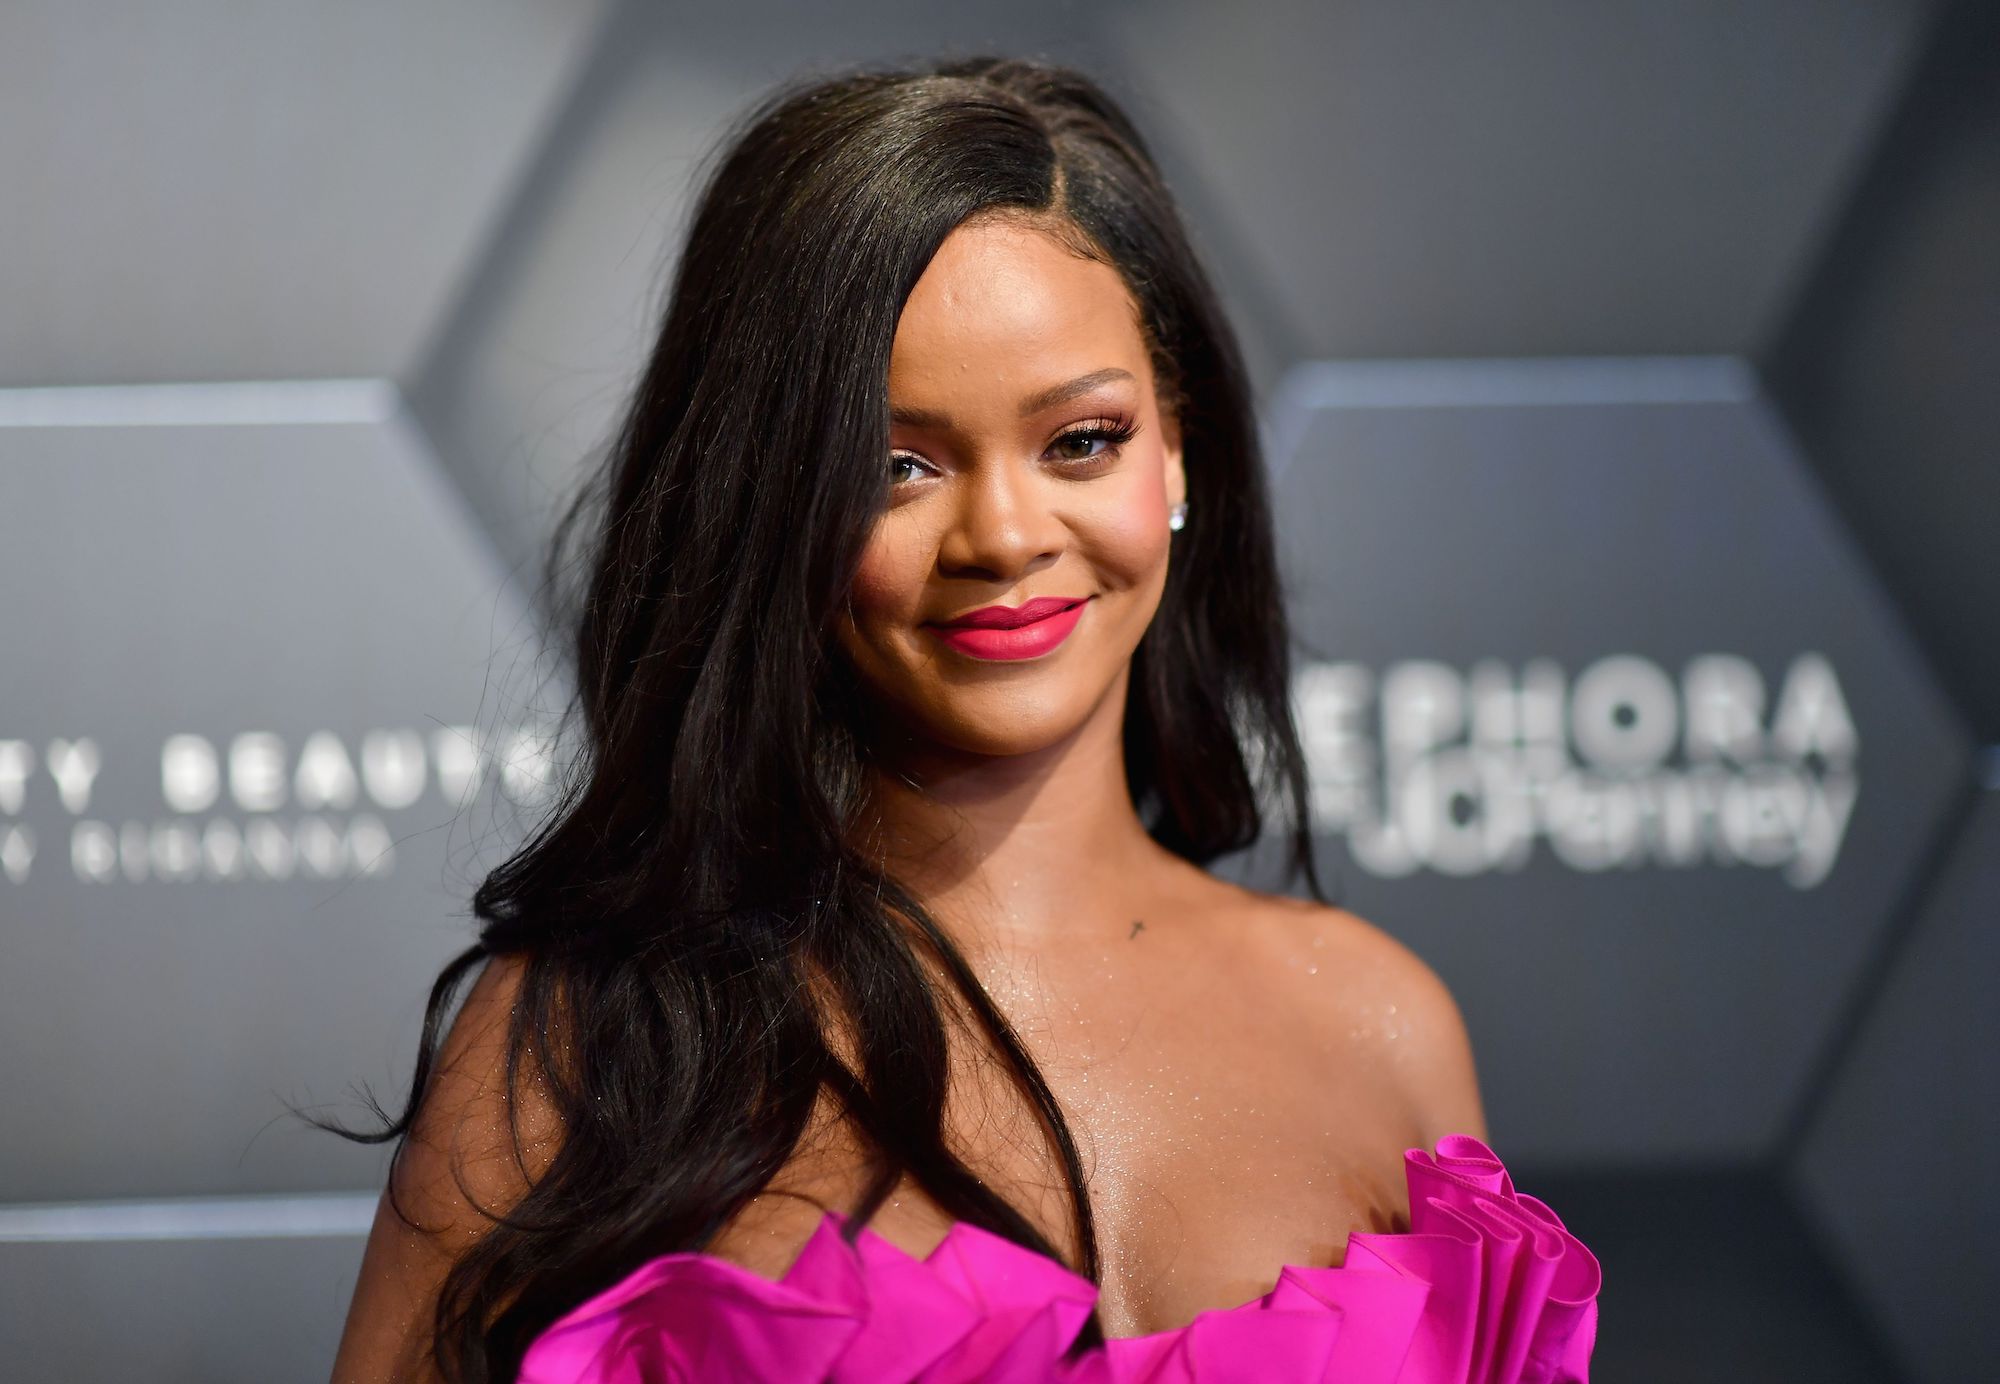 Rihanna smiling in front of a blurred black background